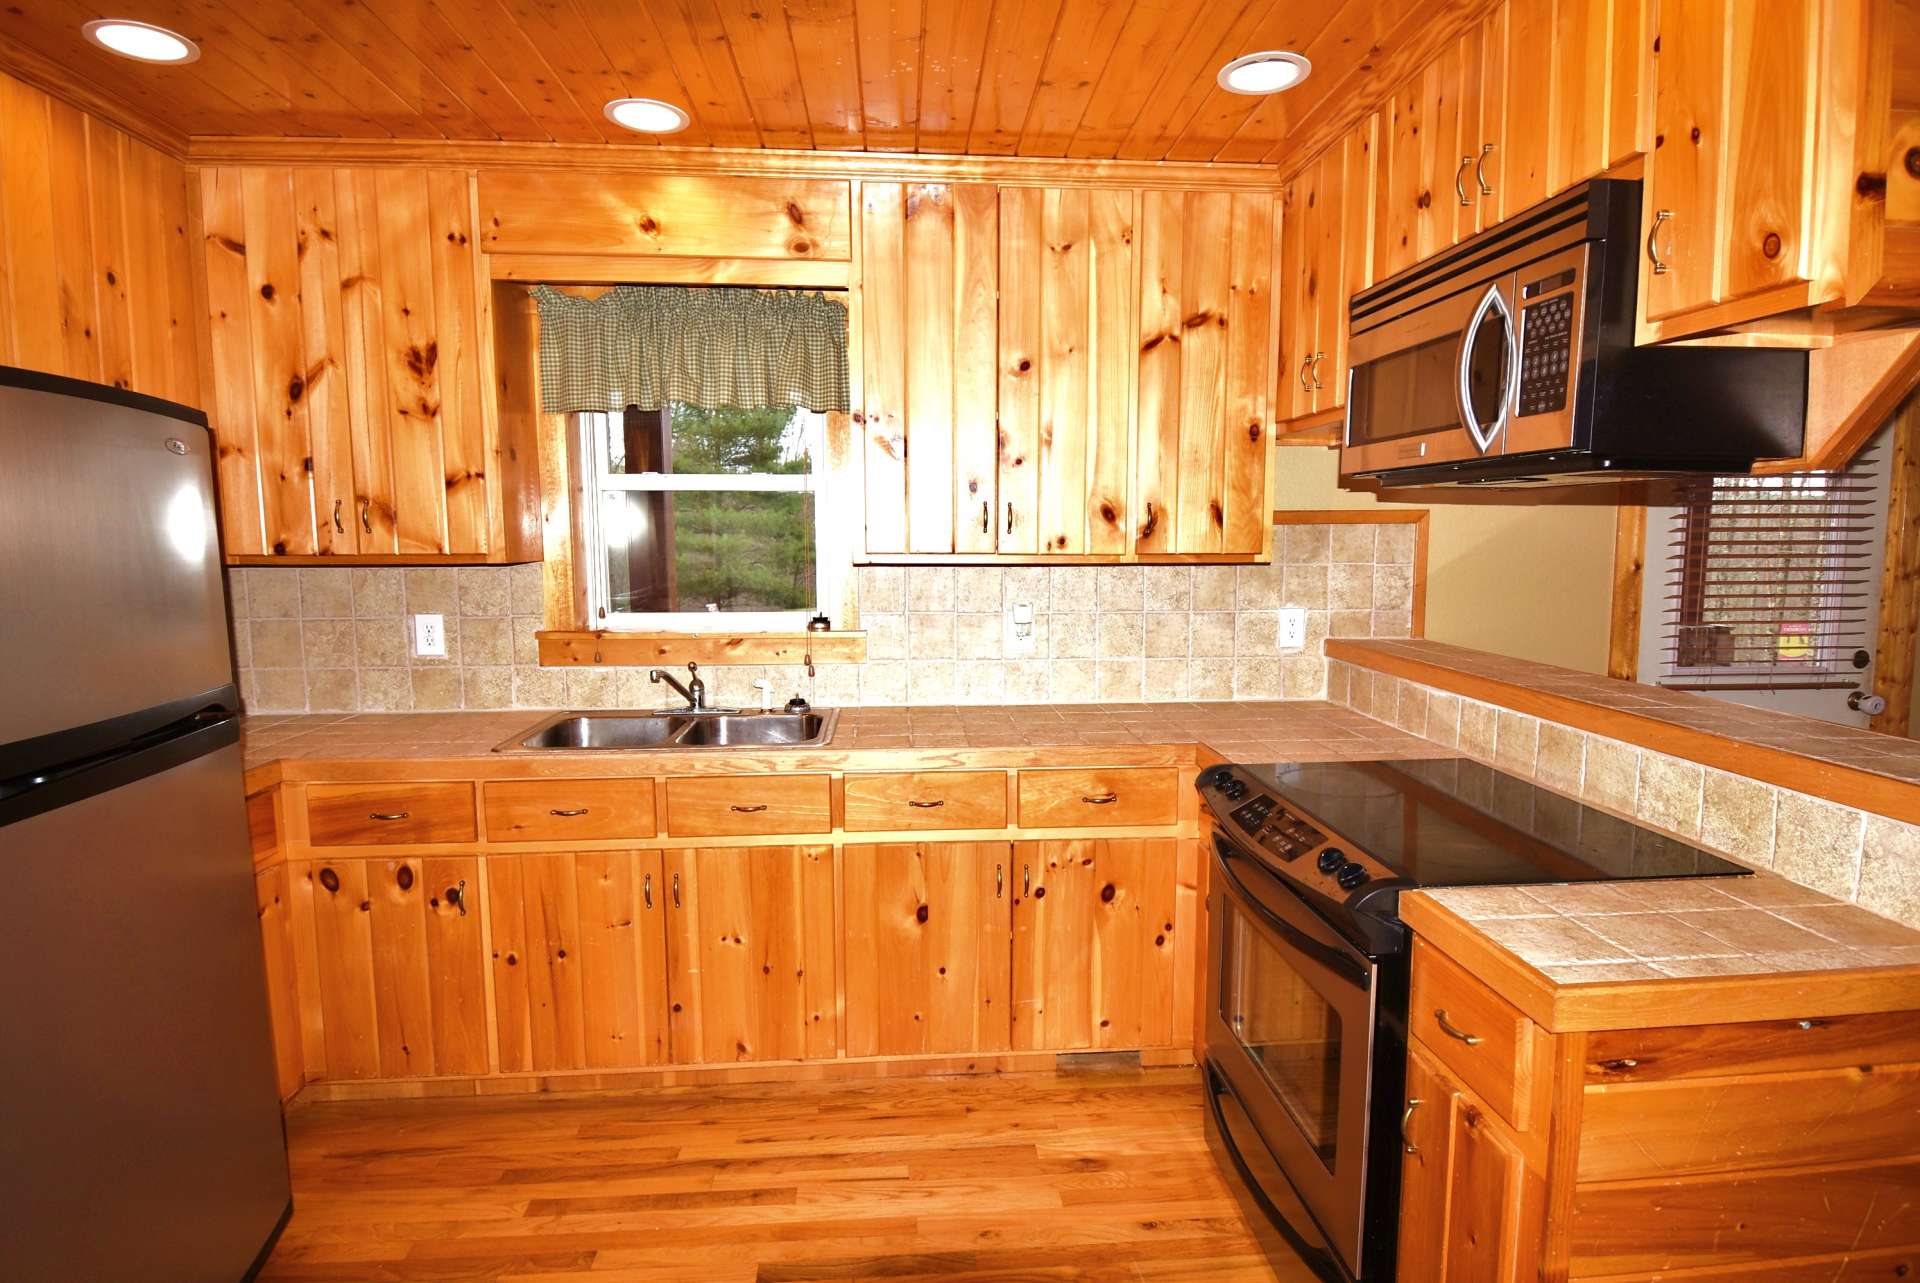 The kitchen offers plenty of work and storage space and a bar with seating space for informal dining.